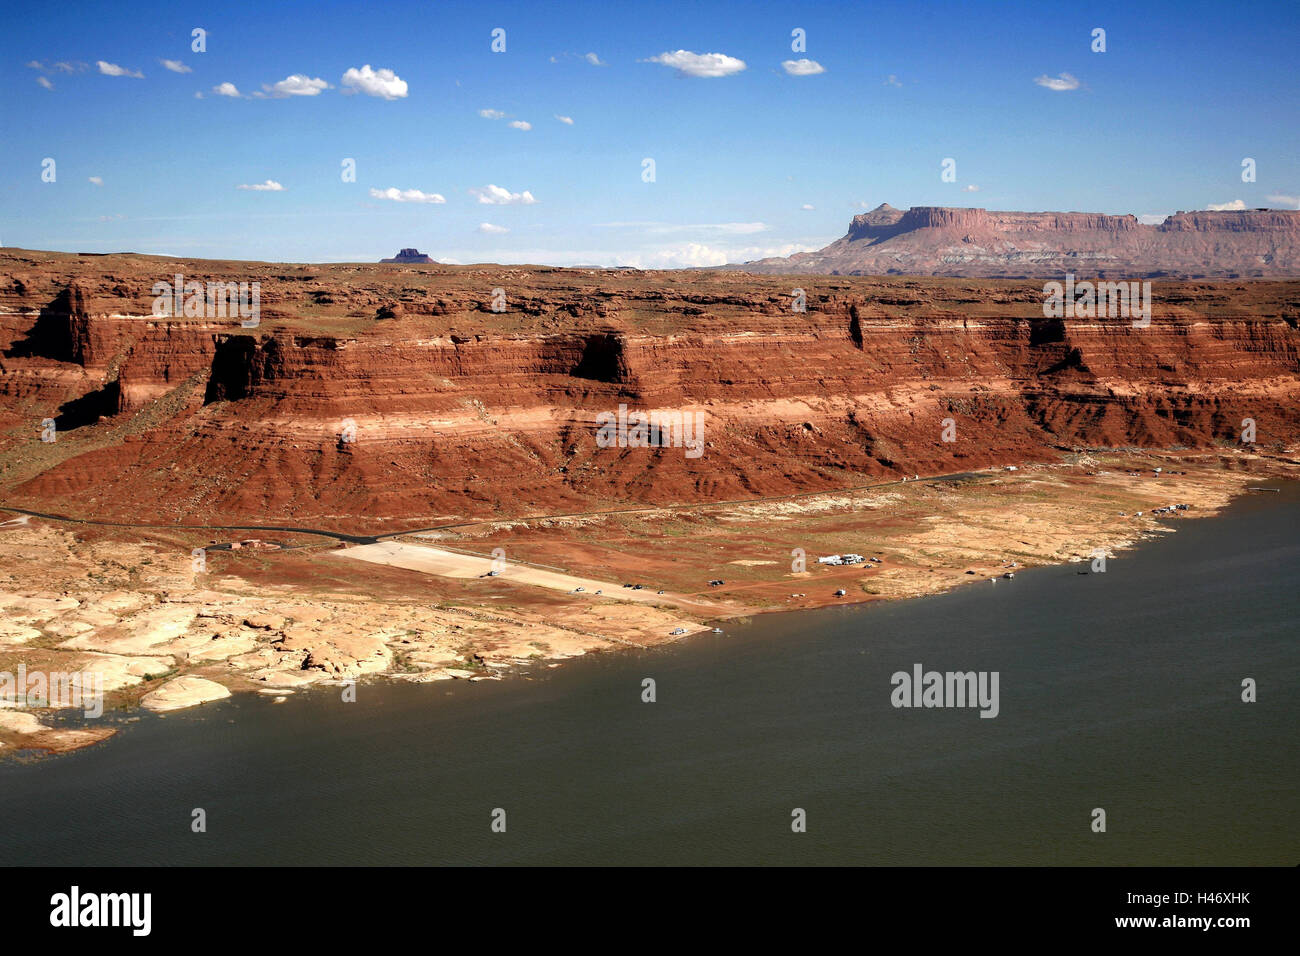 The USA, Utah, Hite, overview, view, view, scenery, nature, Colorado, bridge, rock, bile formations, red, heaven, clouds, travel, on the way, sightseeing, vacation, holidays, rest, camping, Stock Photo